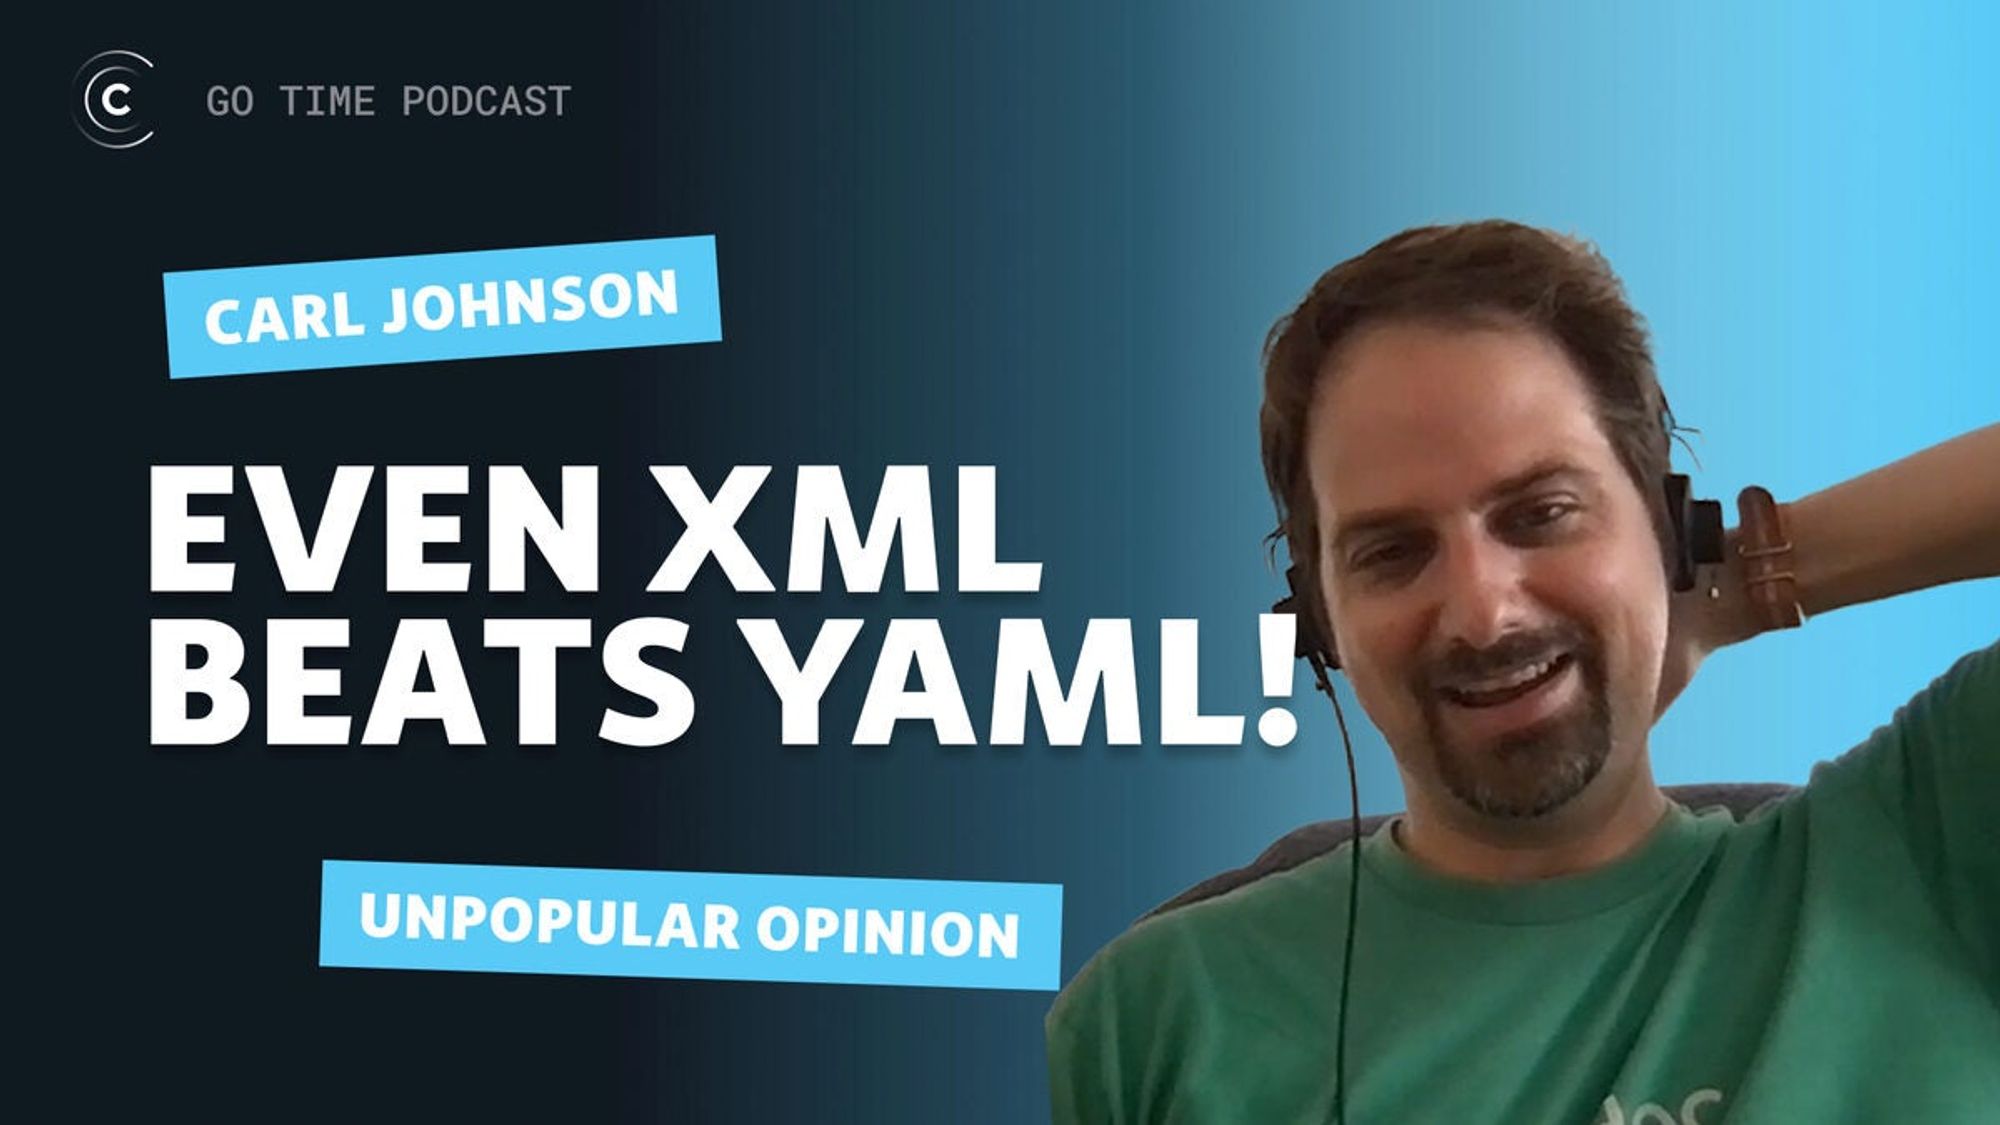 XML is better than YAML. Hear me out...